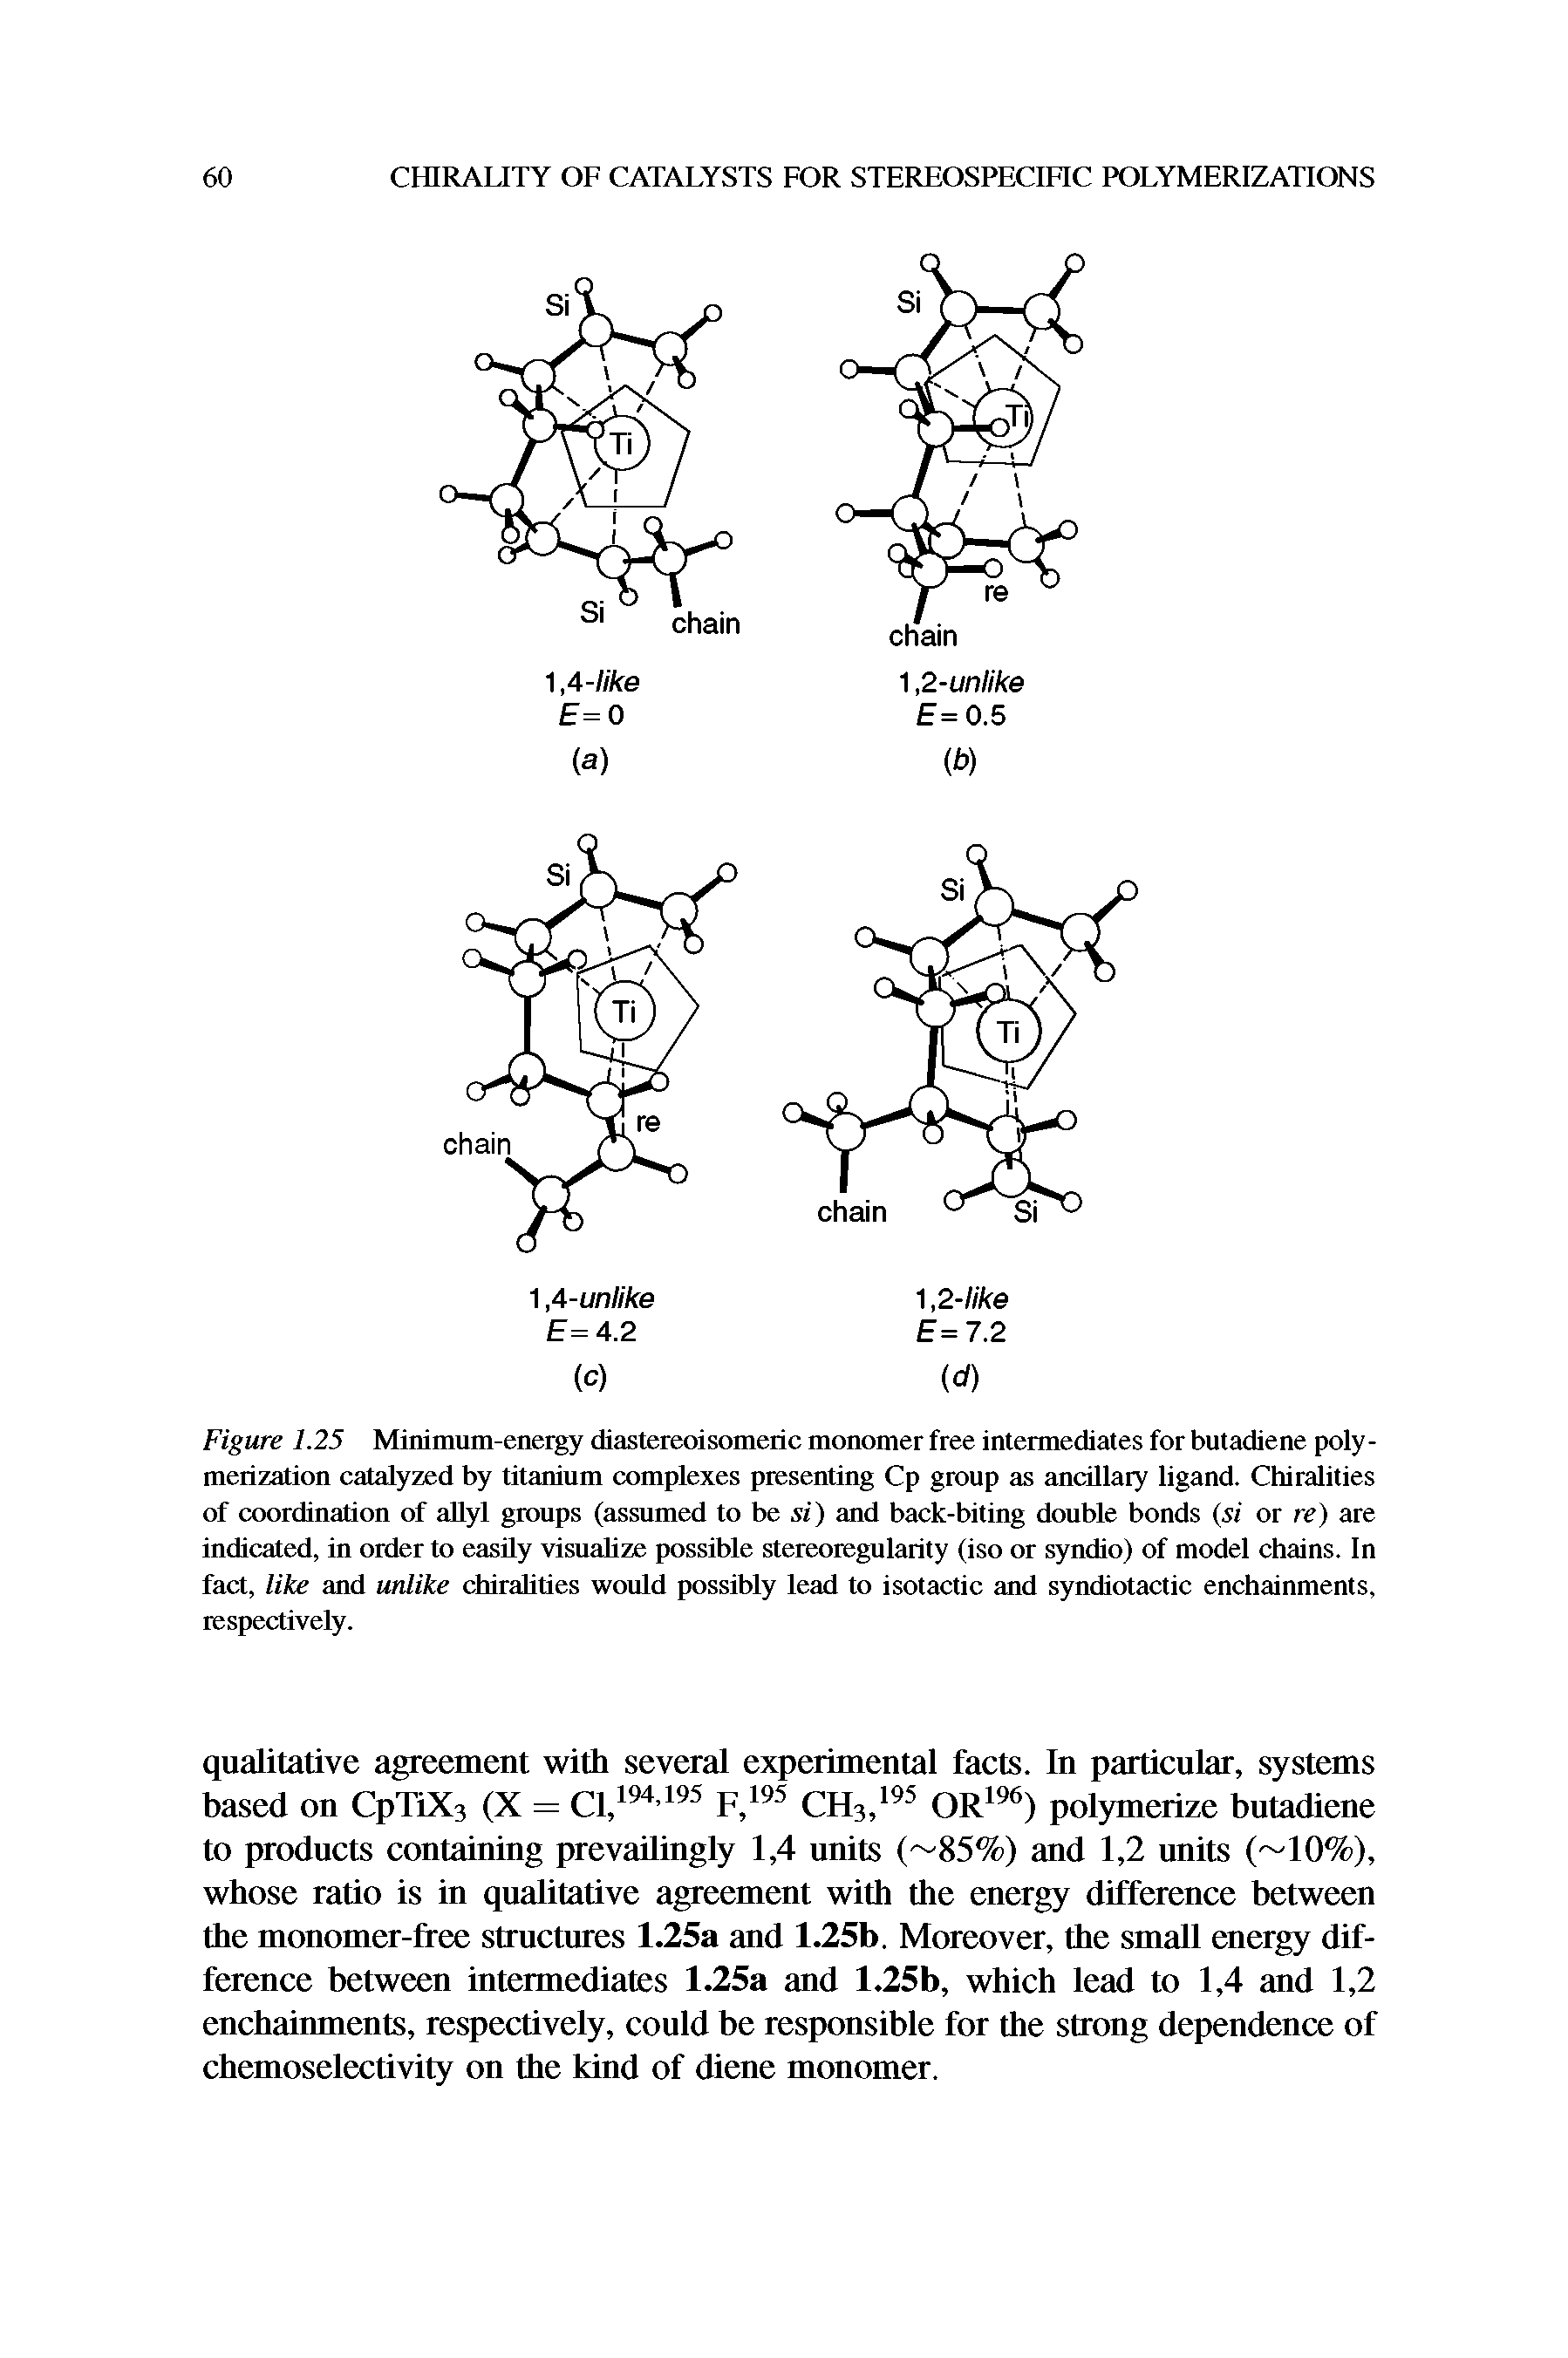 Figure 1.25 Minimum-energy diastereoisomeric monomer free intermediates for butadiene polymerization catalyzed by titanium complexes presenting Cp group as ancillary ligand. Chiralities of coordination of allyl groups (assumed to be si) and back-biting double bonds (si or re) are indicated, in order to easily visualize possible stereoregularity (iso or syndio) of model chains. In fact, like and unlike chiralities would possibly lead to isotactic and syndiotactic enchainments, respectively.